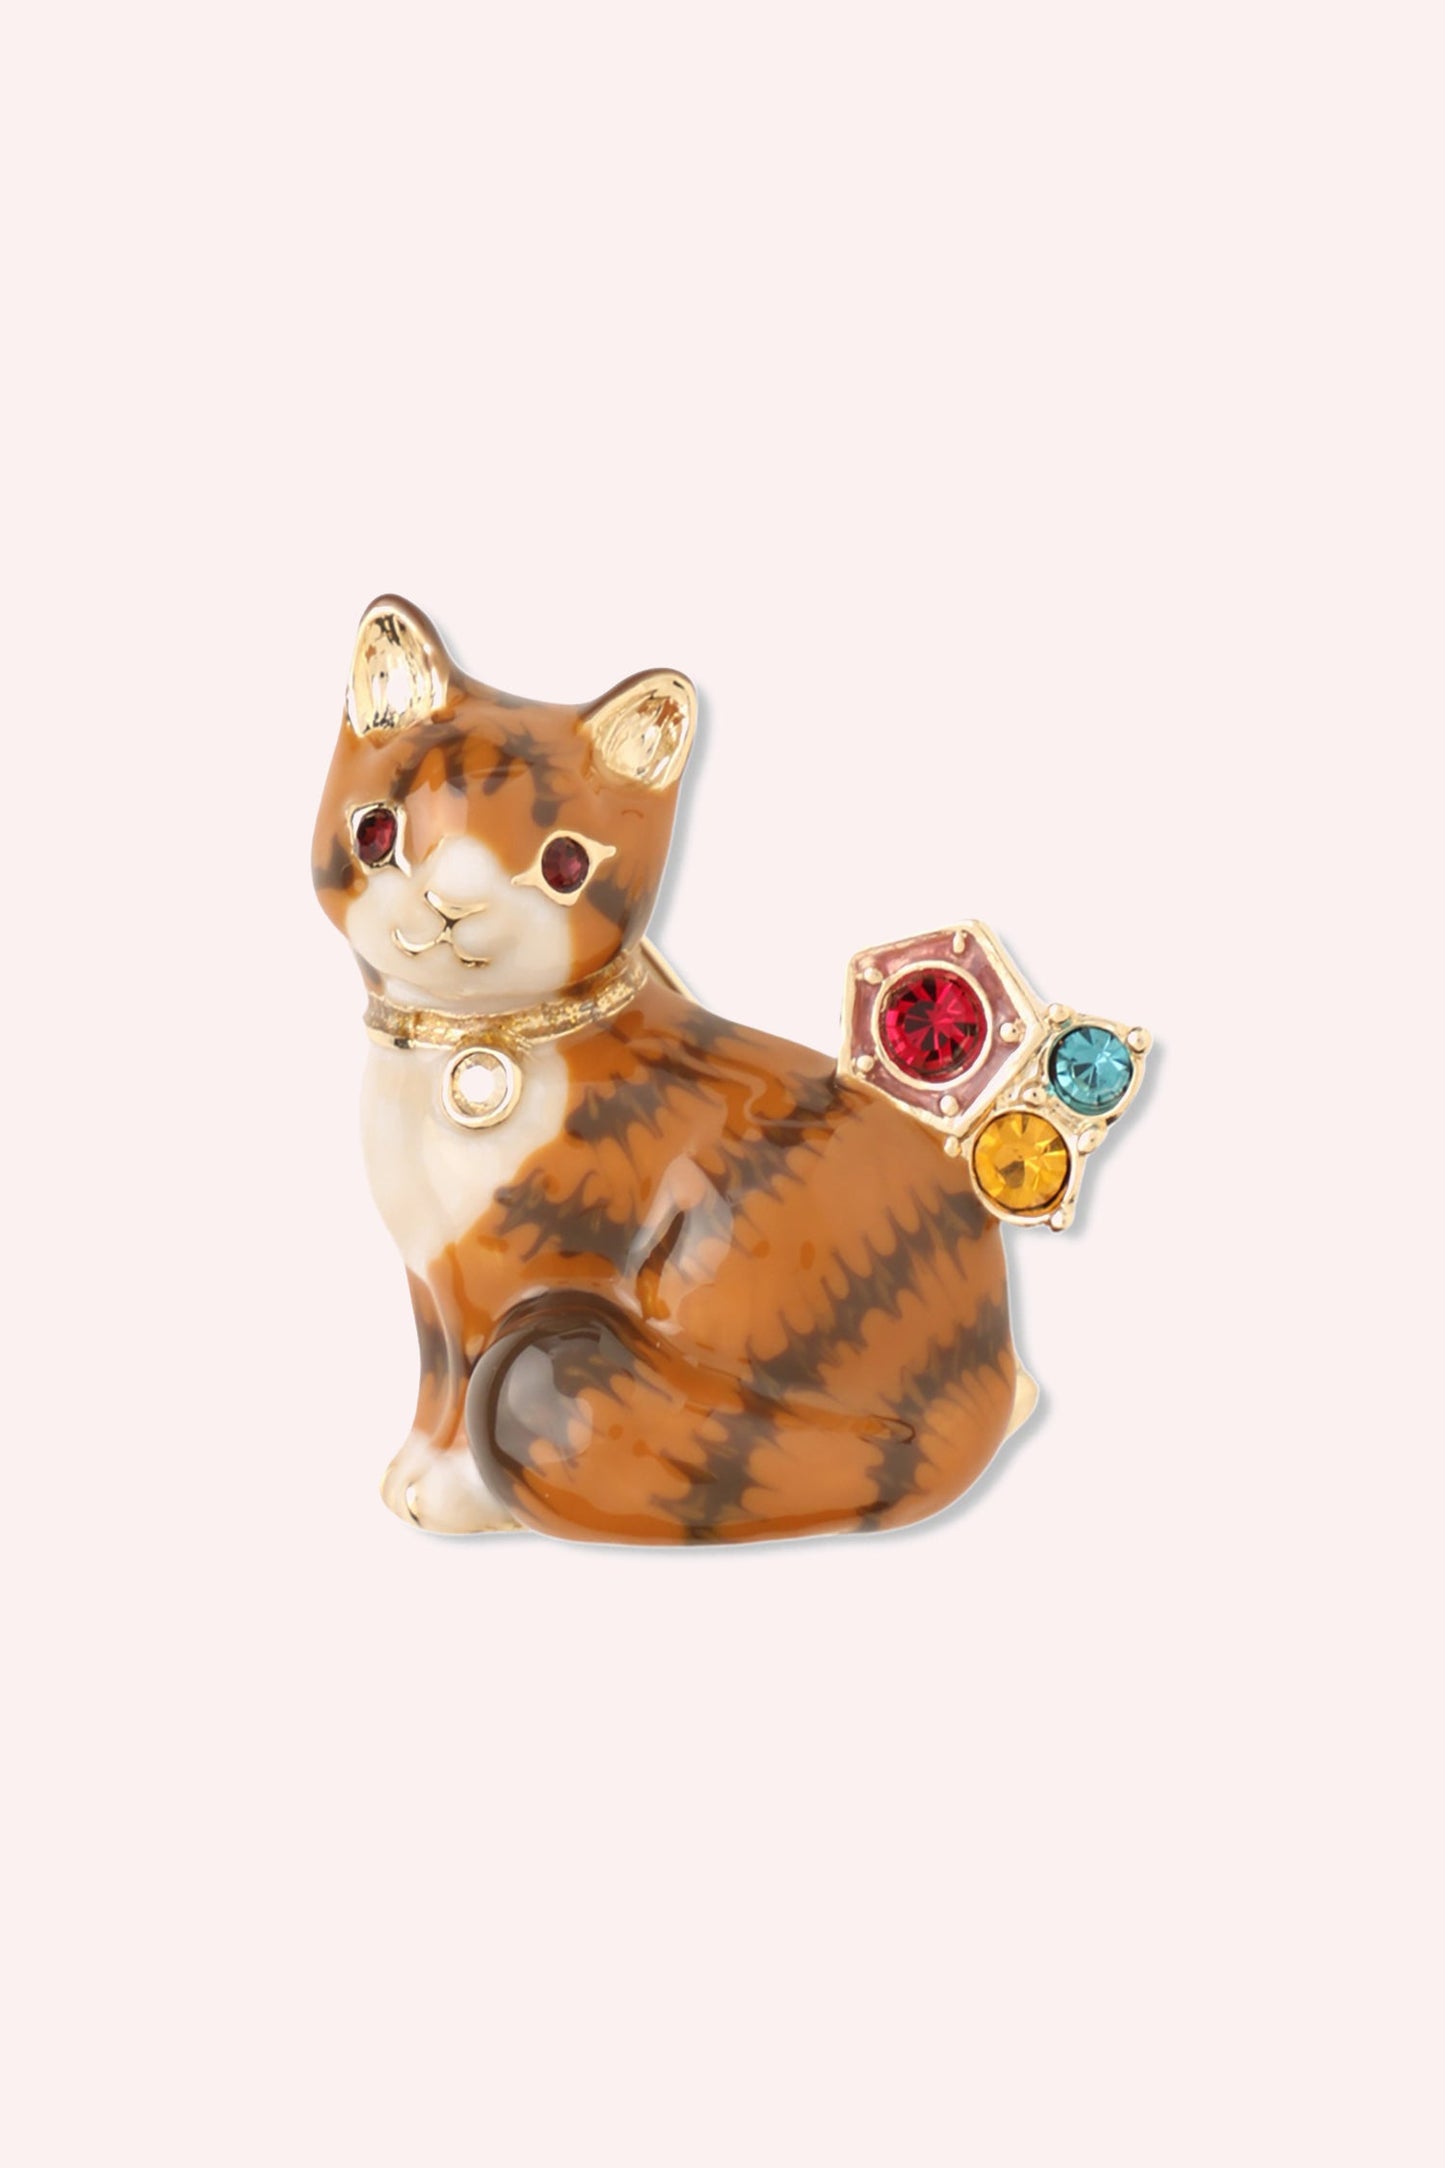 Striped Cat Brooch Orange cat brooch embellished with multi-colored blue/red/green gems